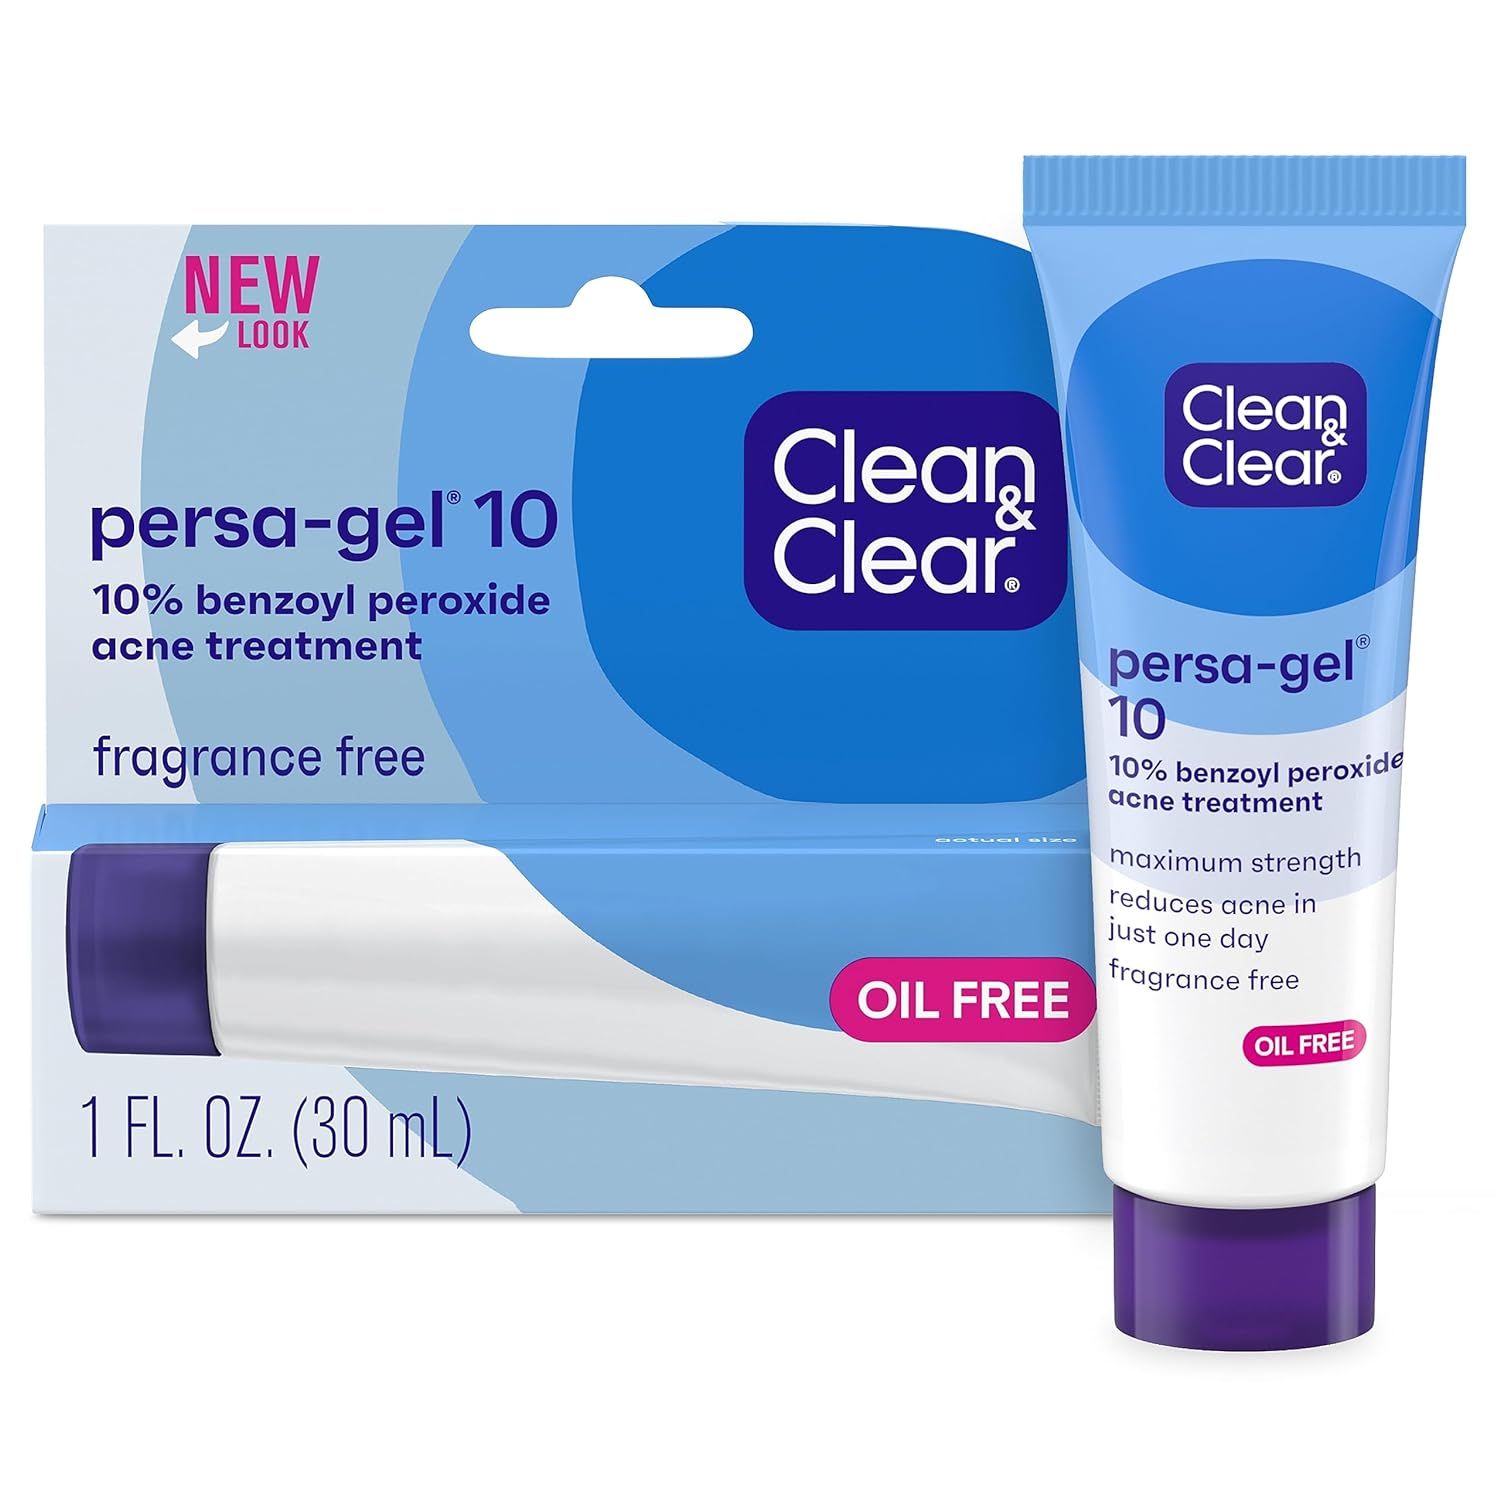 Clean & Clear Persa-Gel 10 Acne Medication Spot Treatment with Maximum Strength 10% Benzoyl Perox... | Amazon (US)